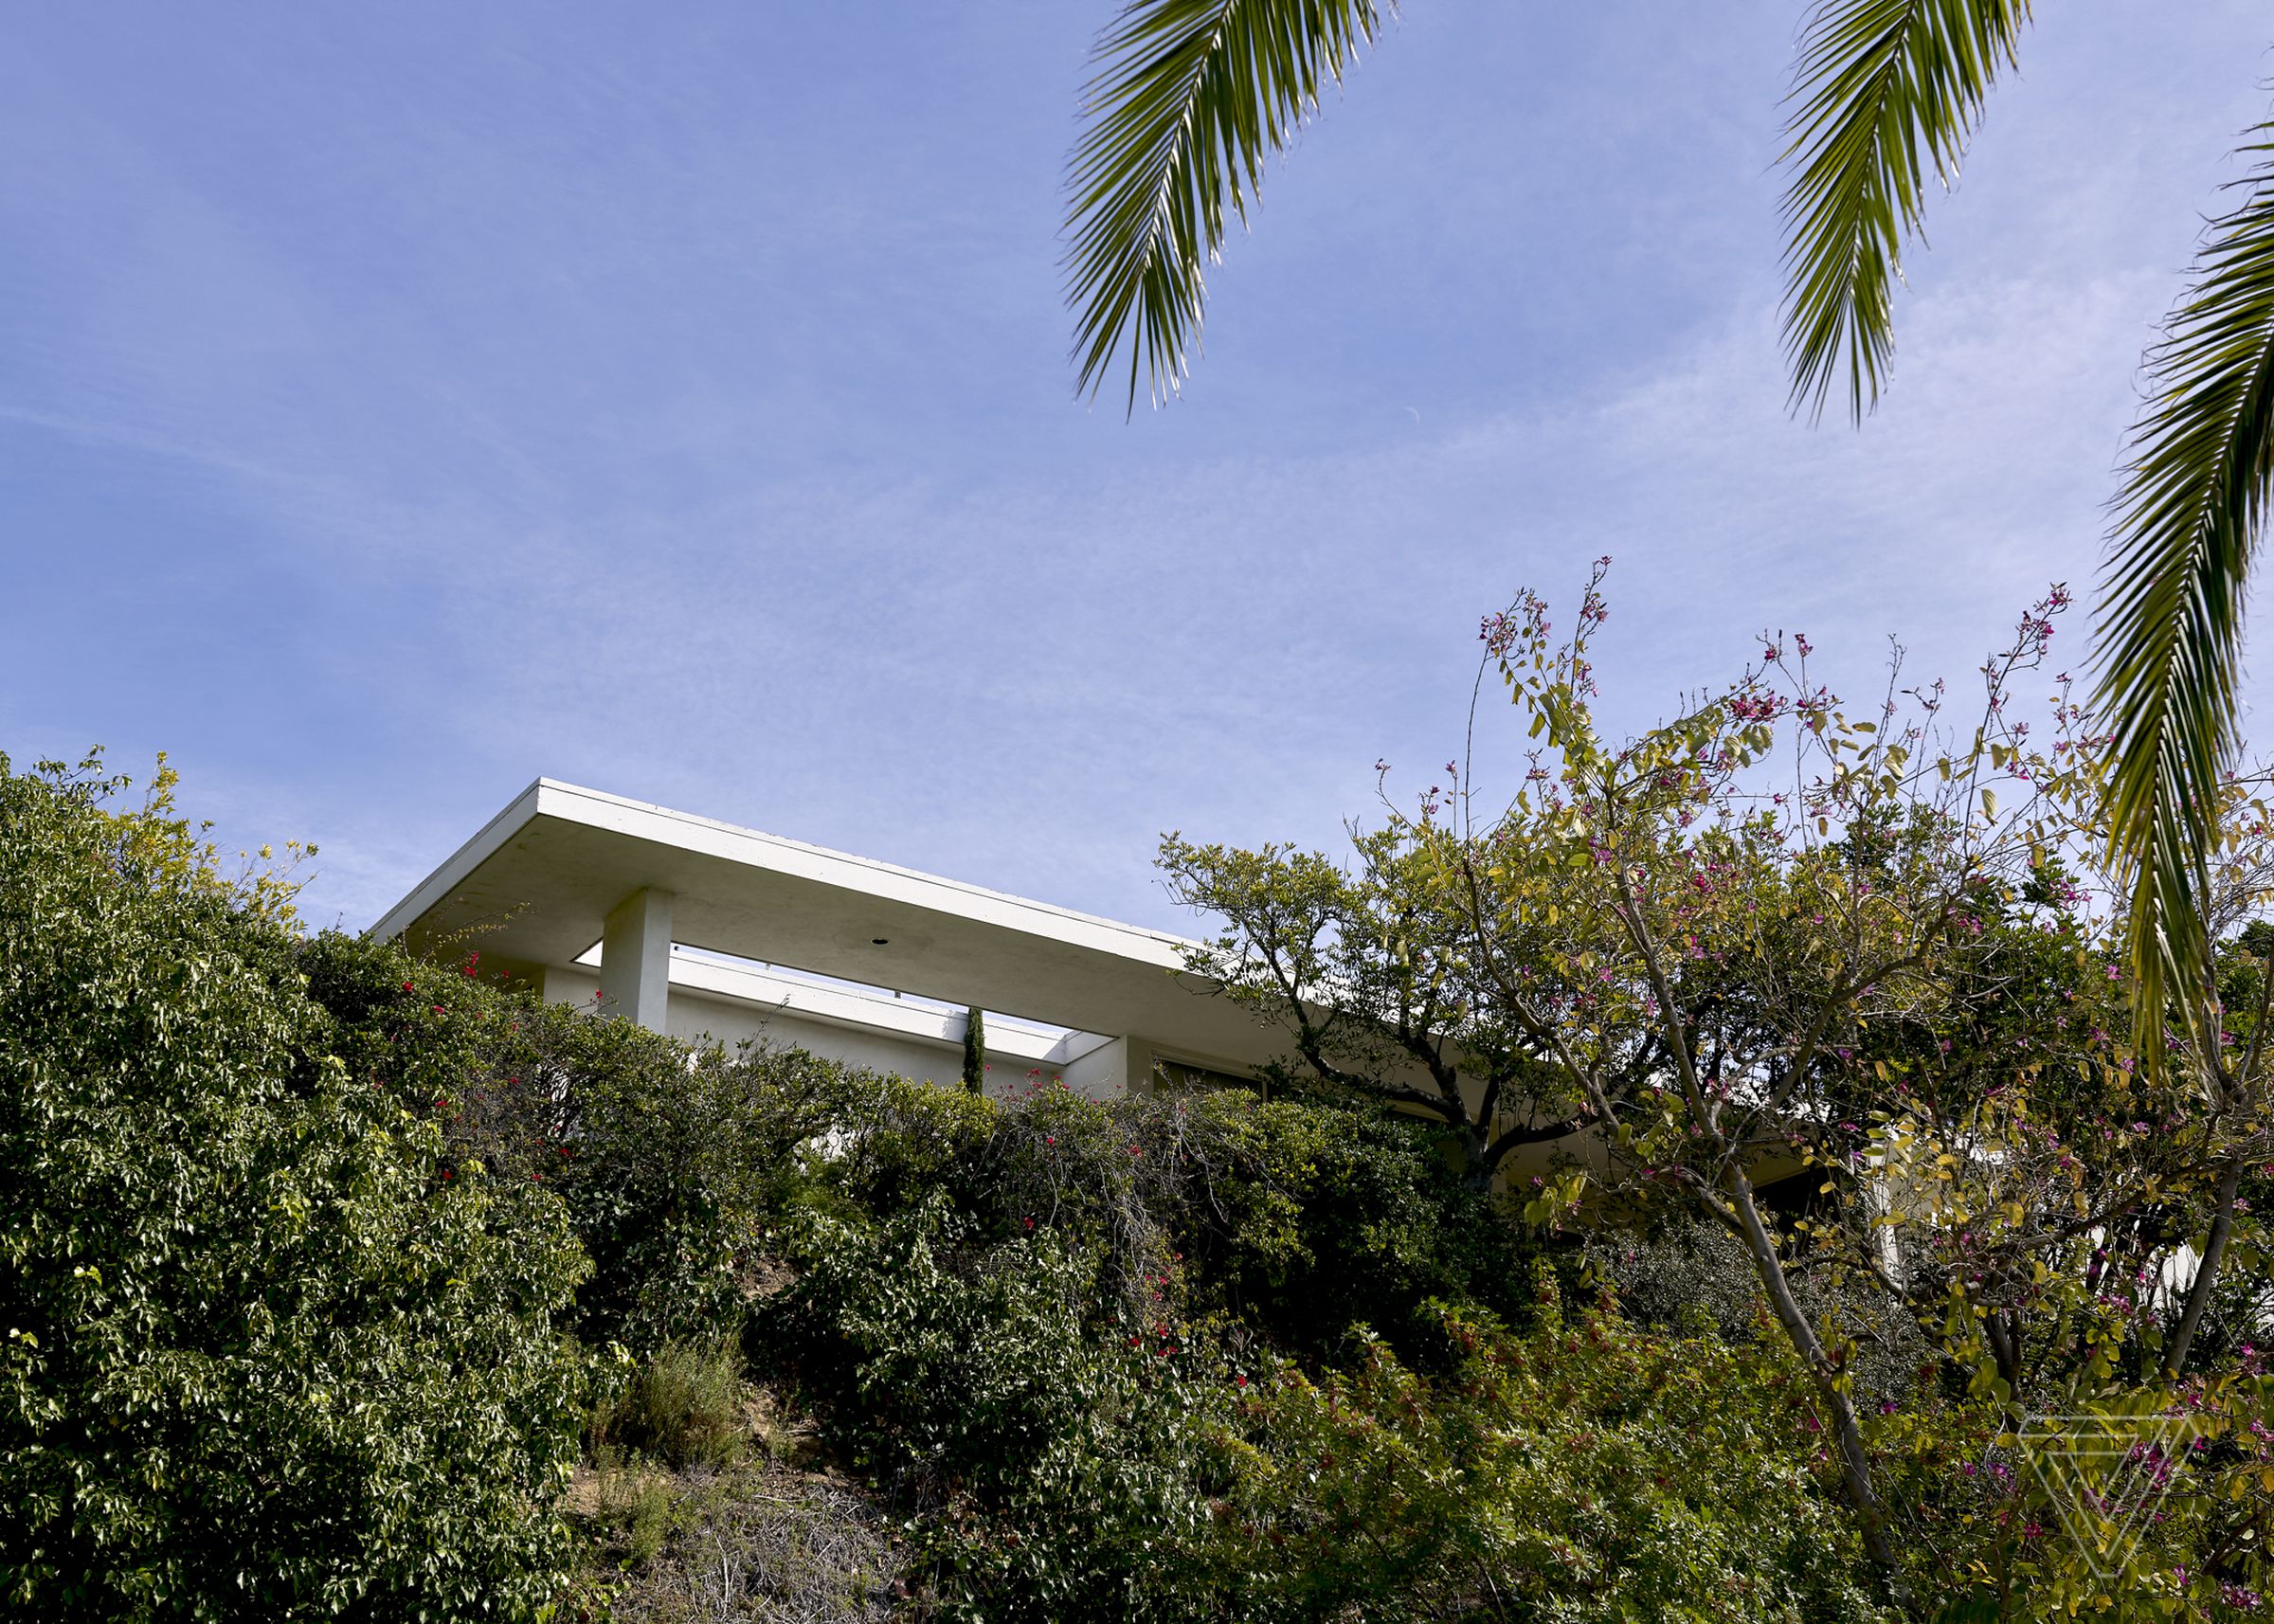 The house sits in the hills of Los Angeles with a view of the city.